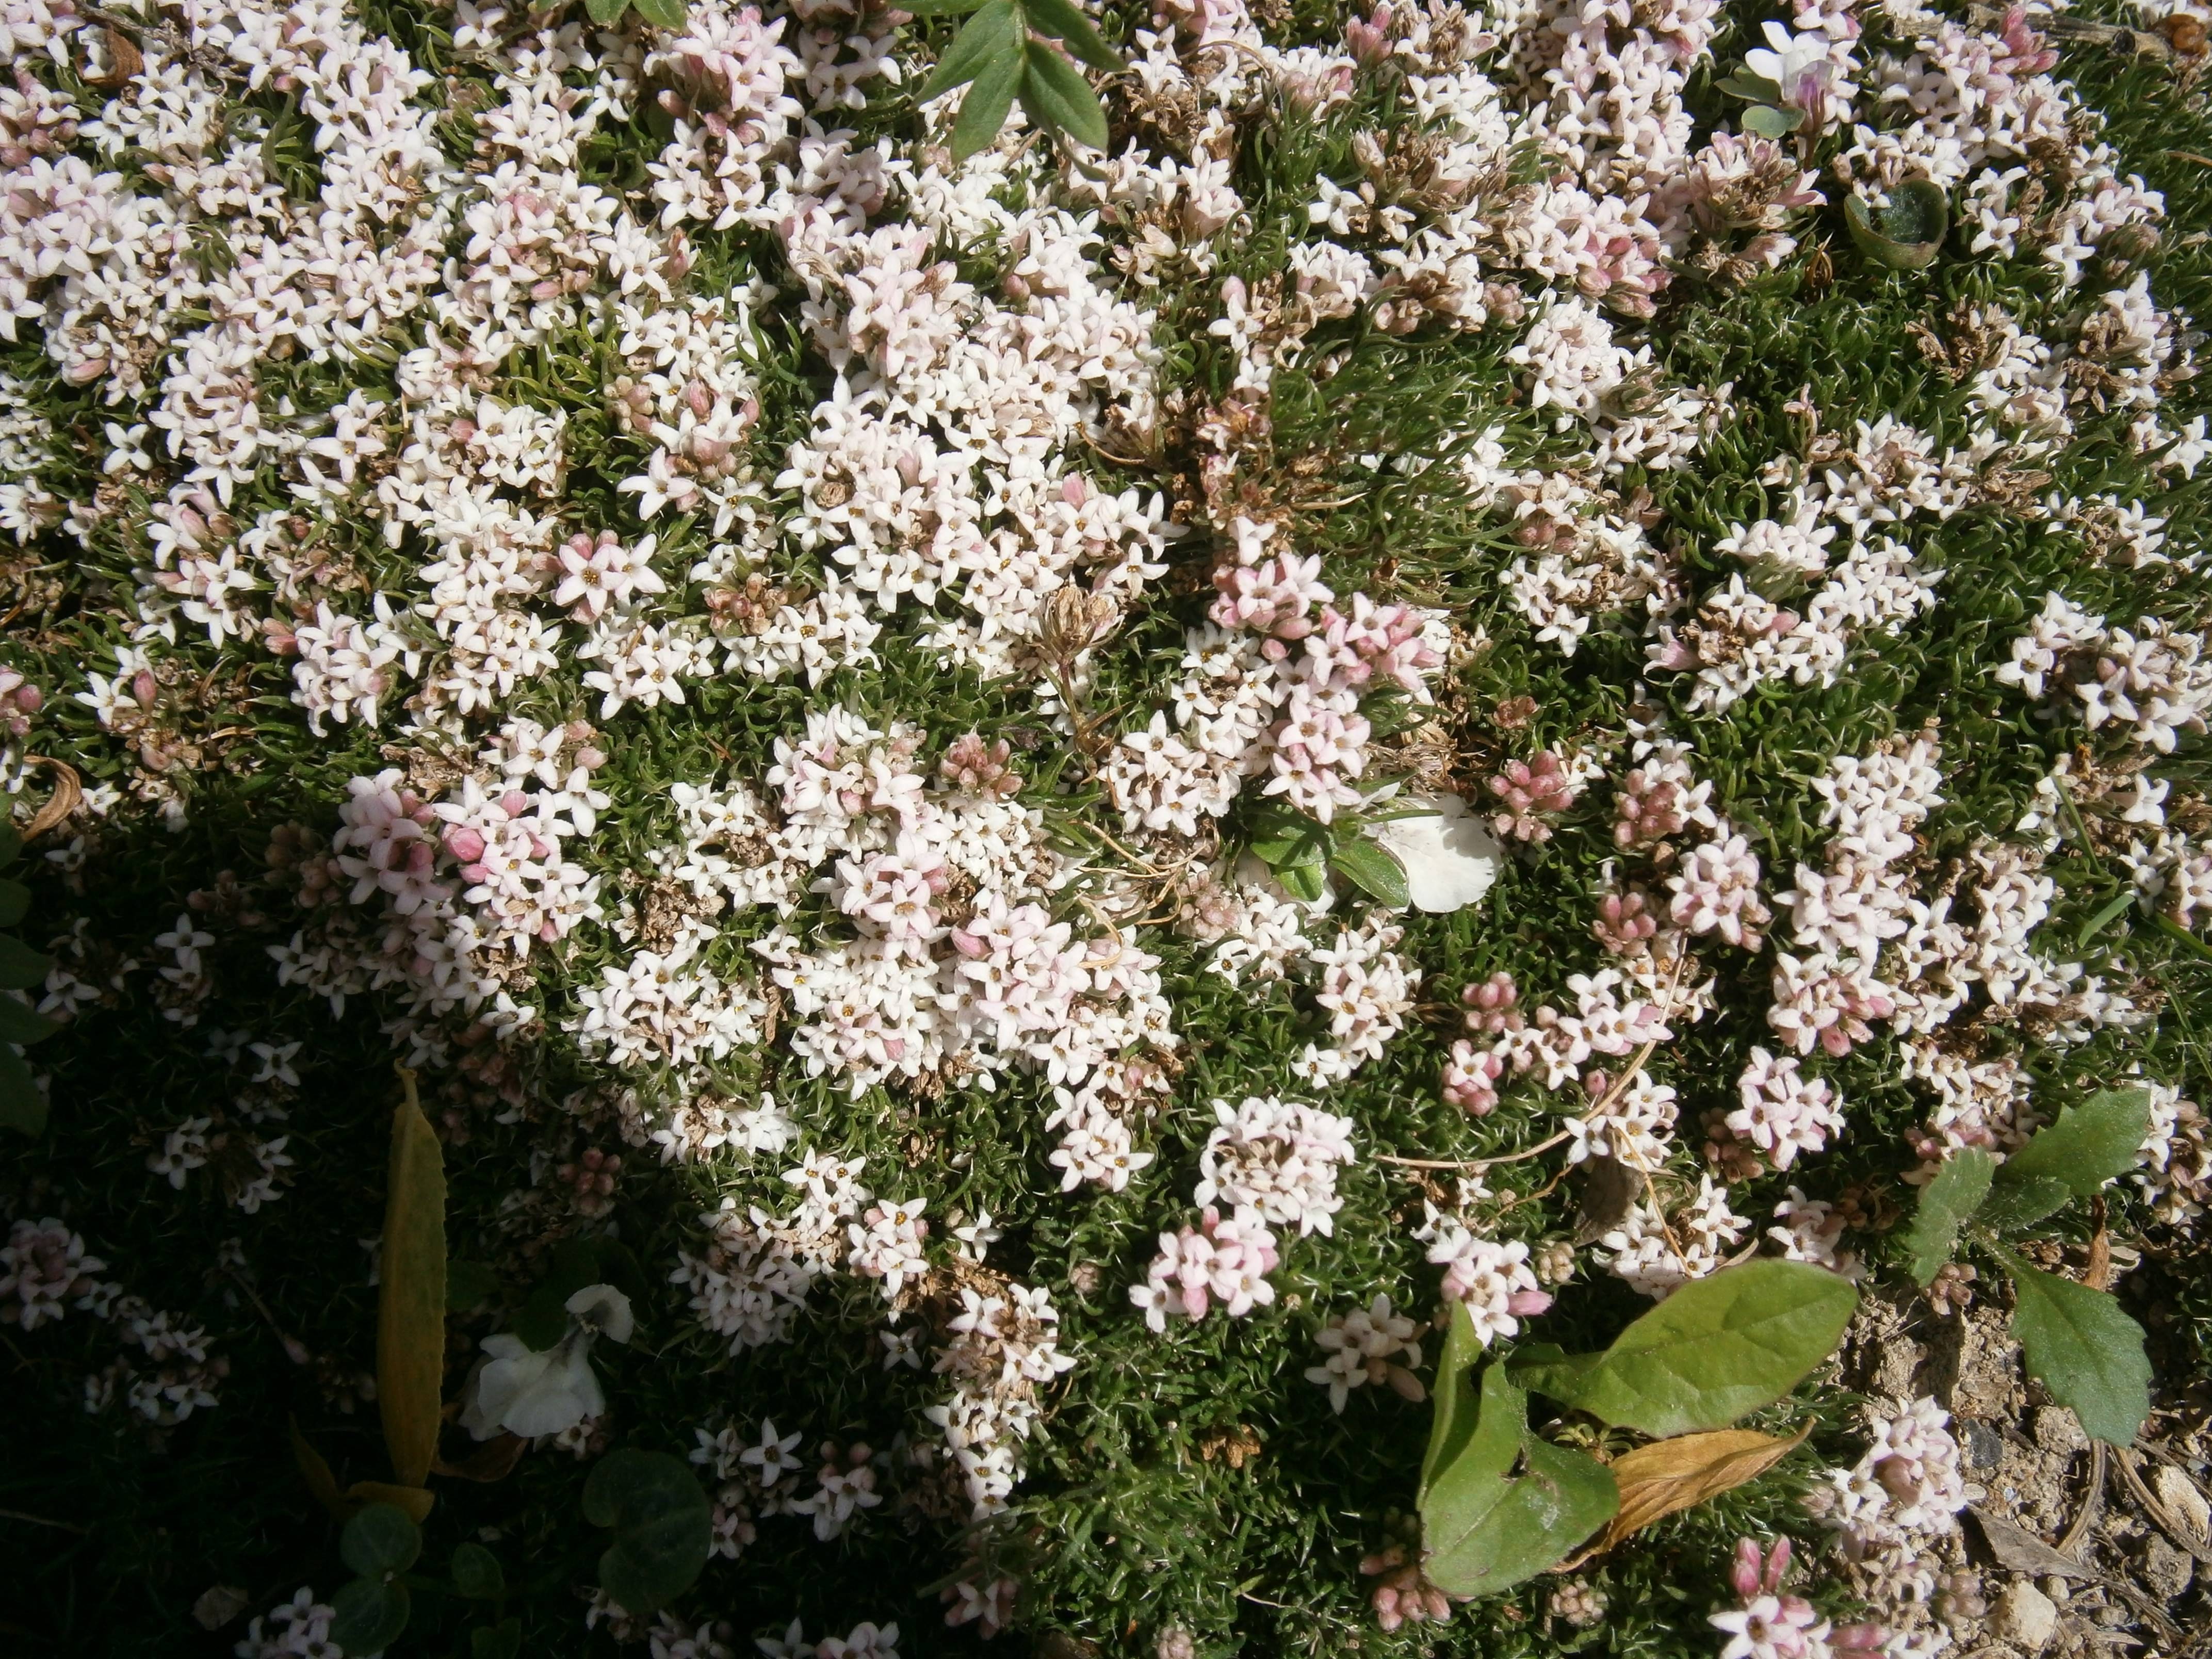 white-pink flowers with green leaves and stems